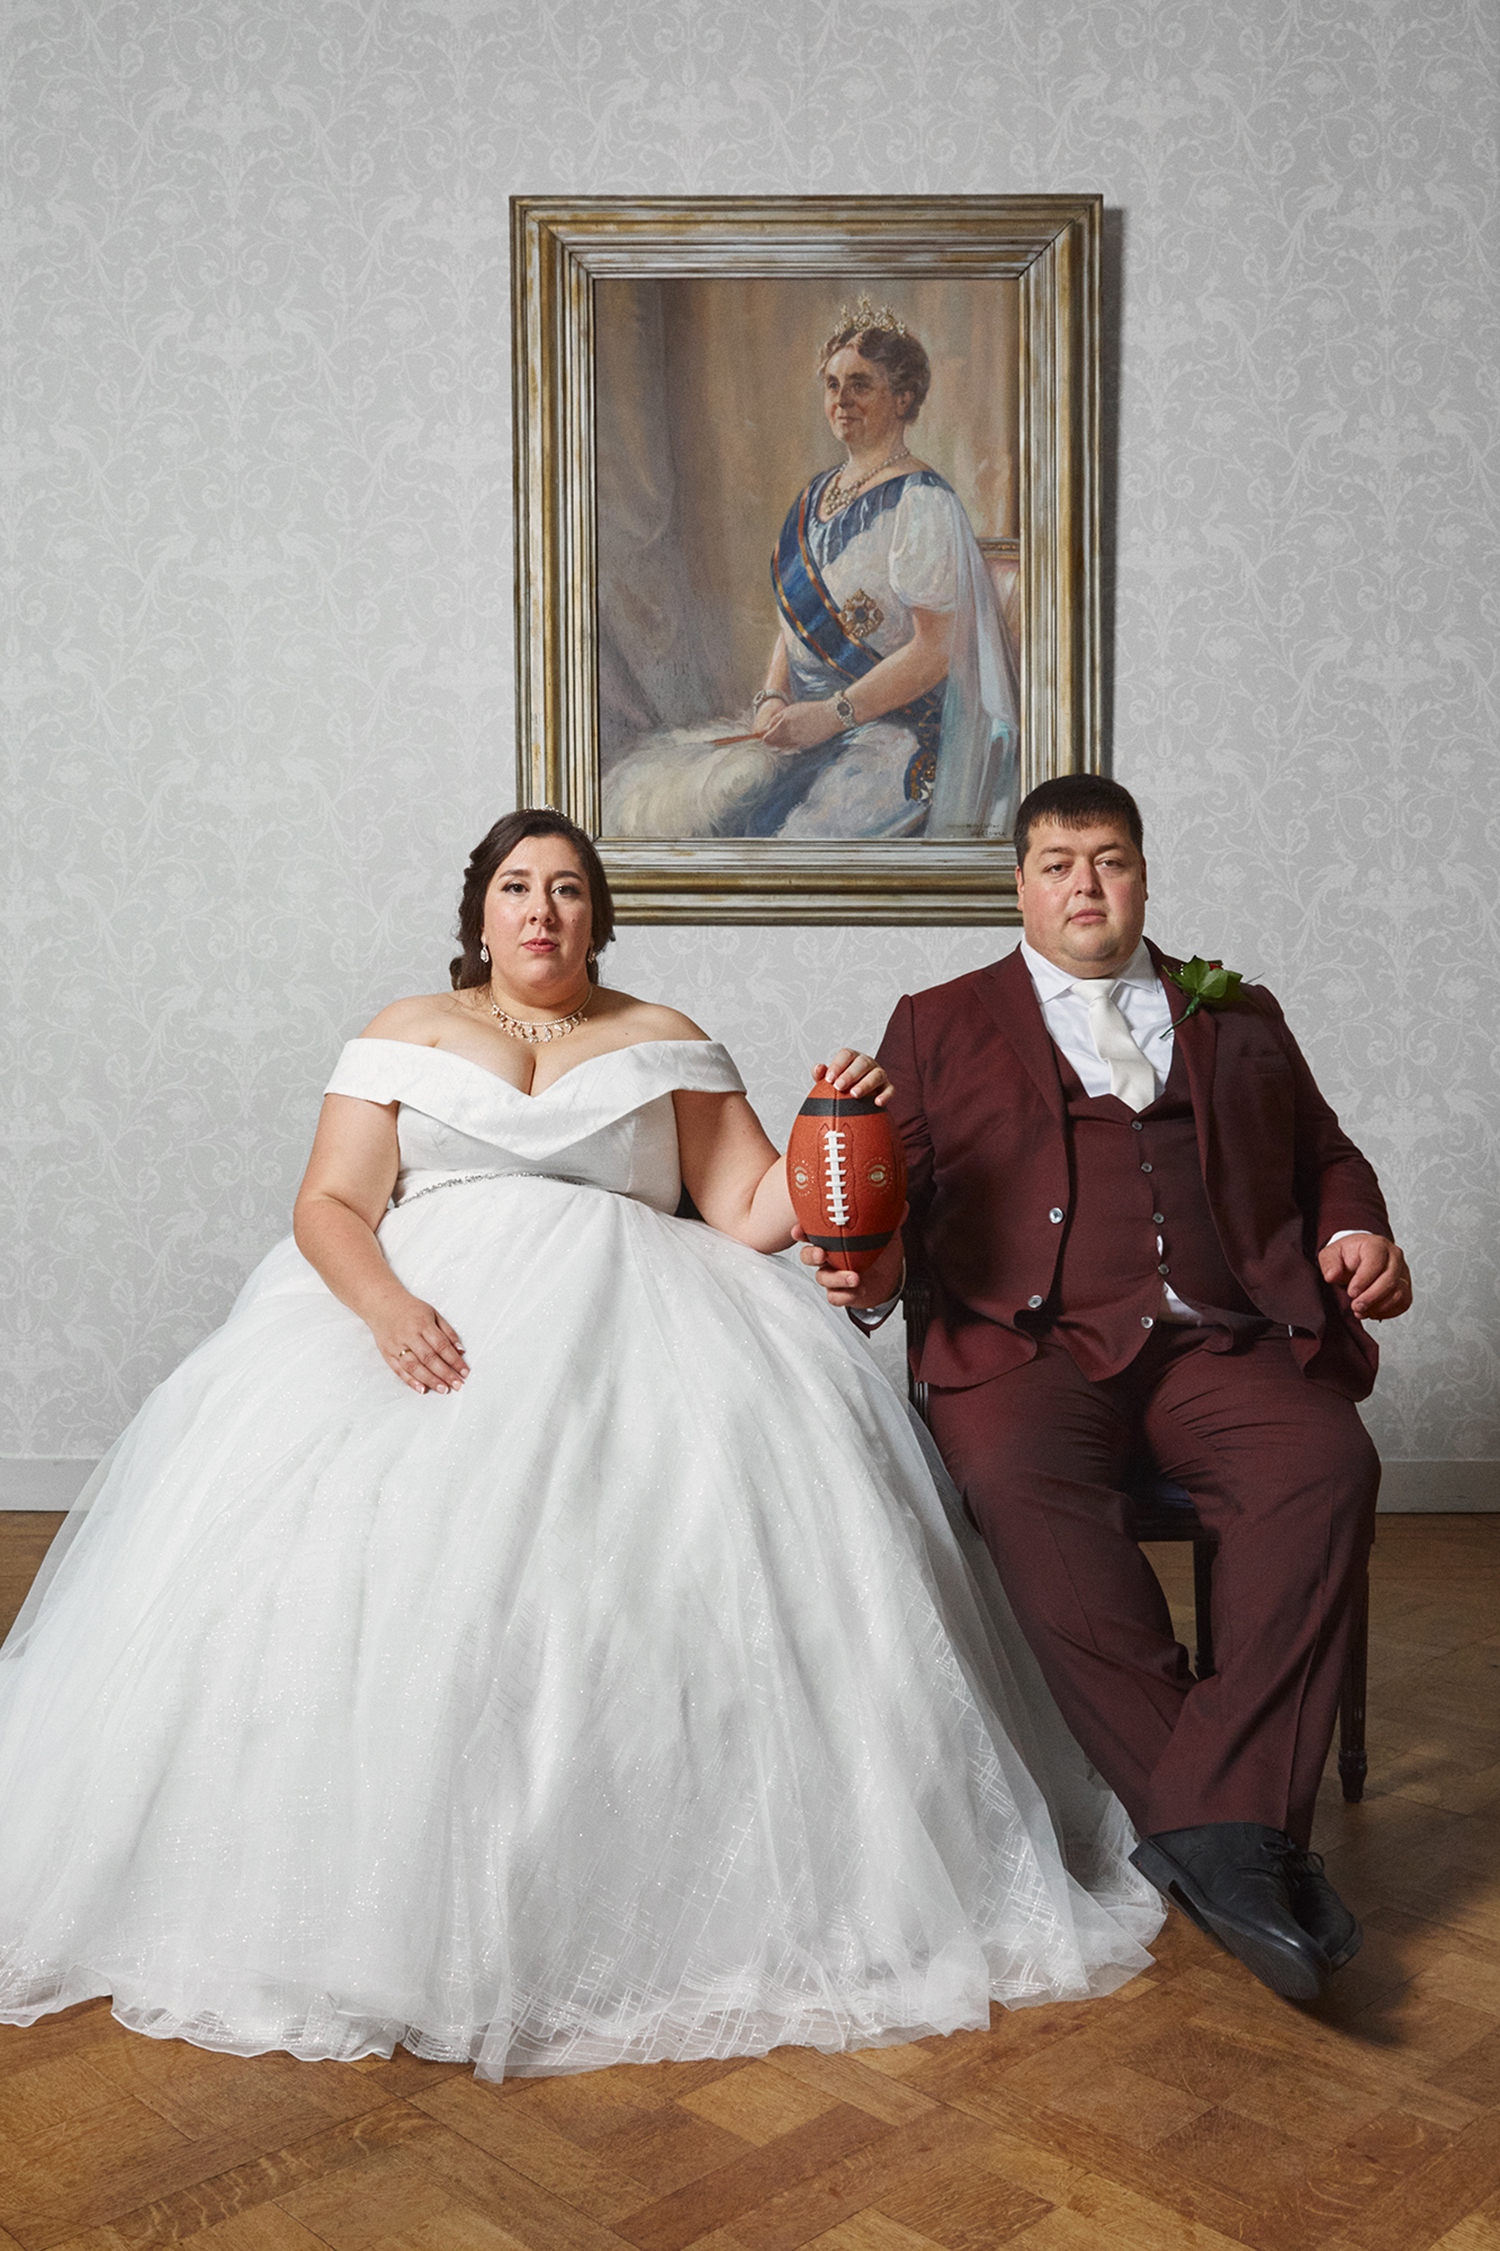 Gunther_Julia_Newlyweds Michelle and Barry de Boer sit for a wedding portrait on their wedding day